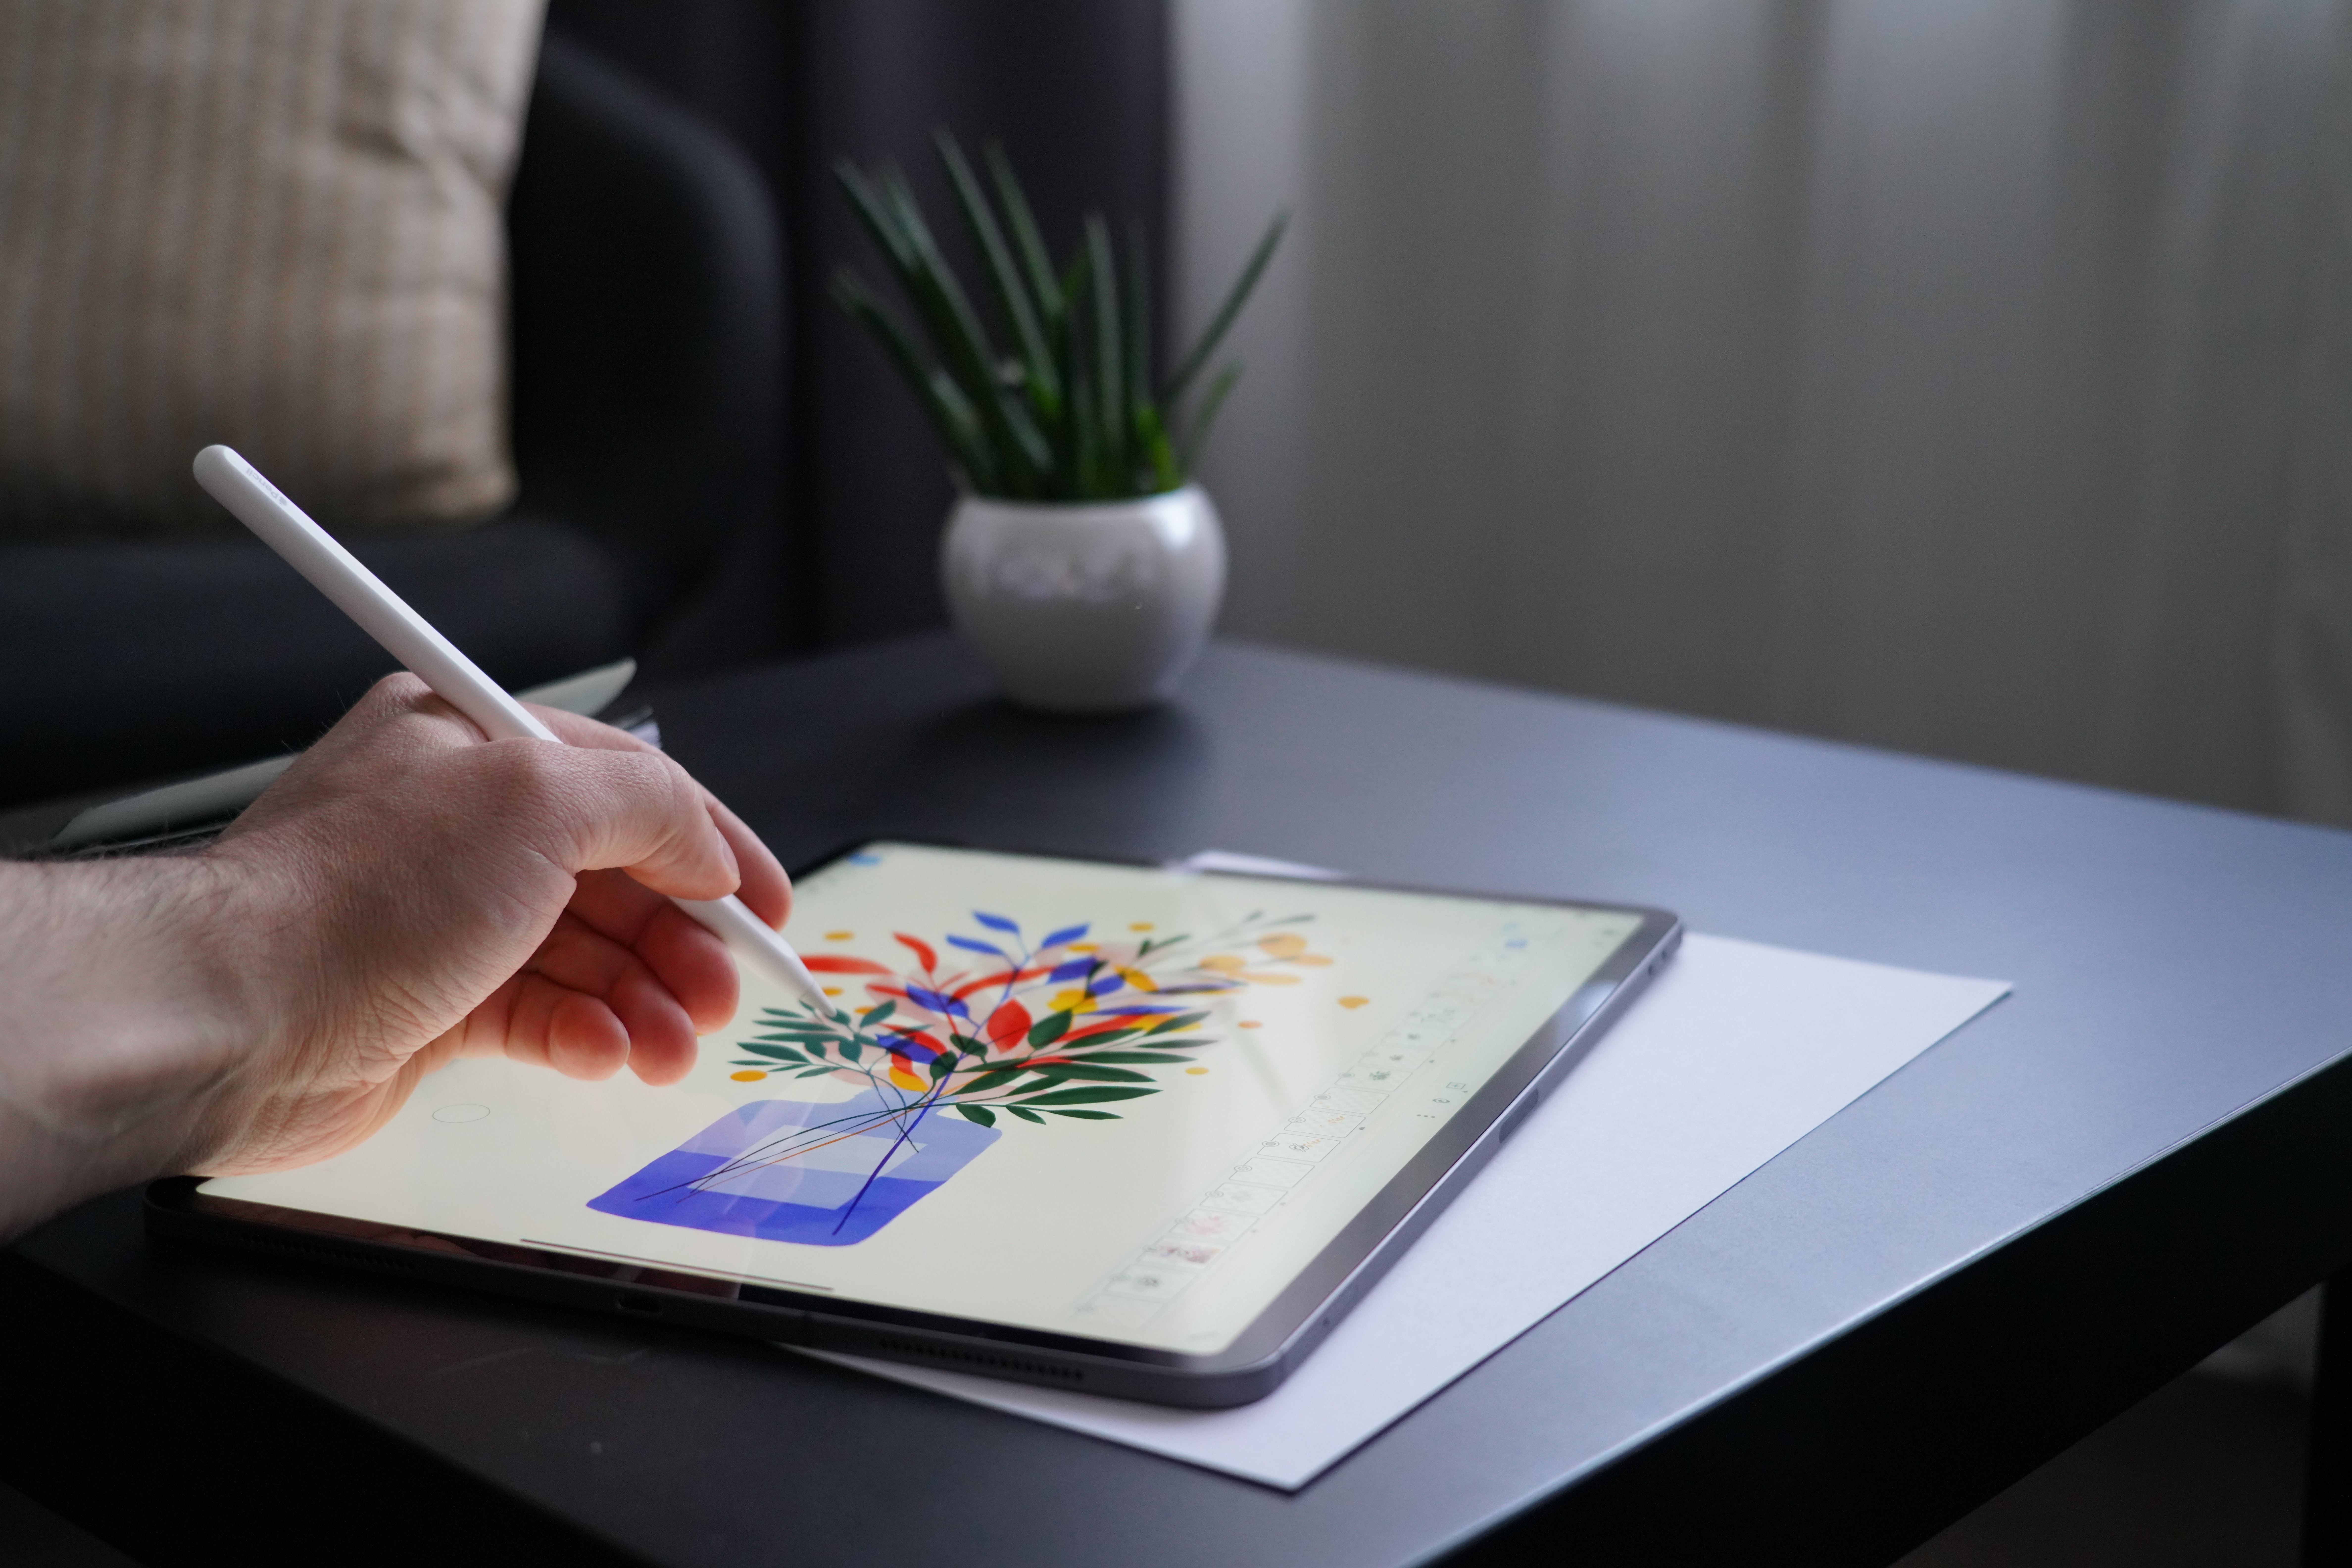 iPad OS 15 accessibility features benefit people with disabilities